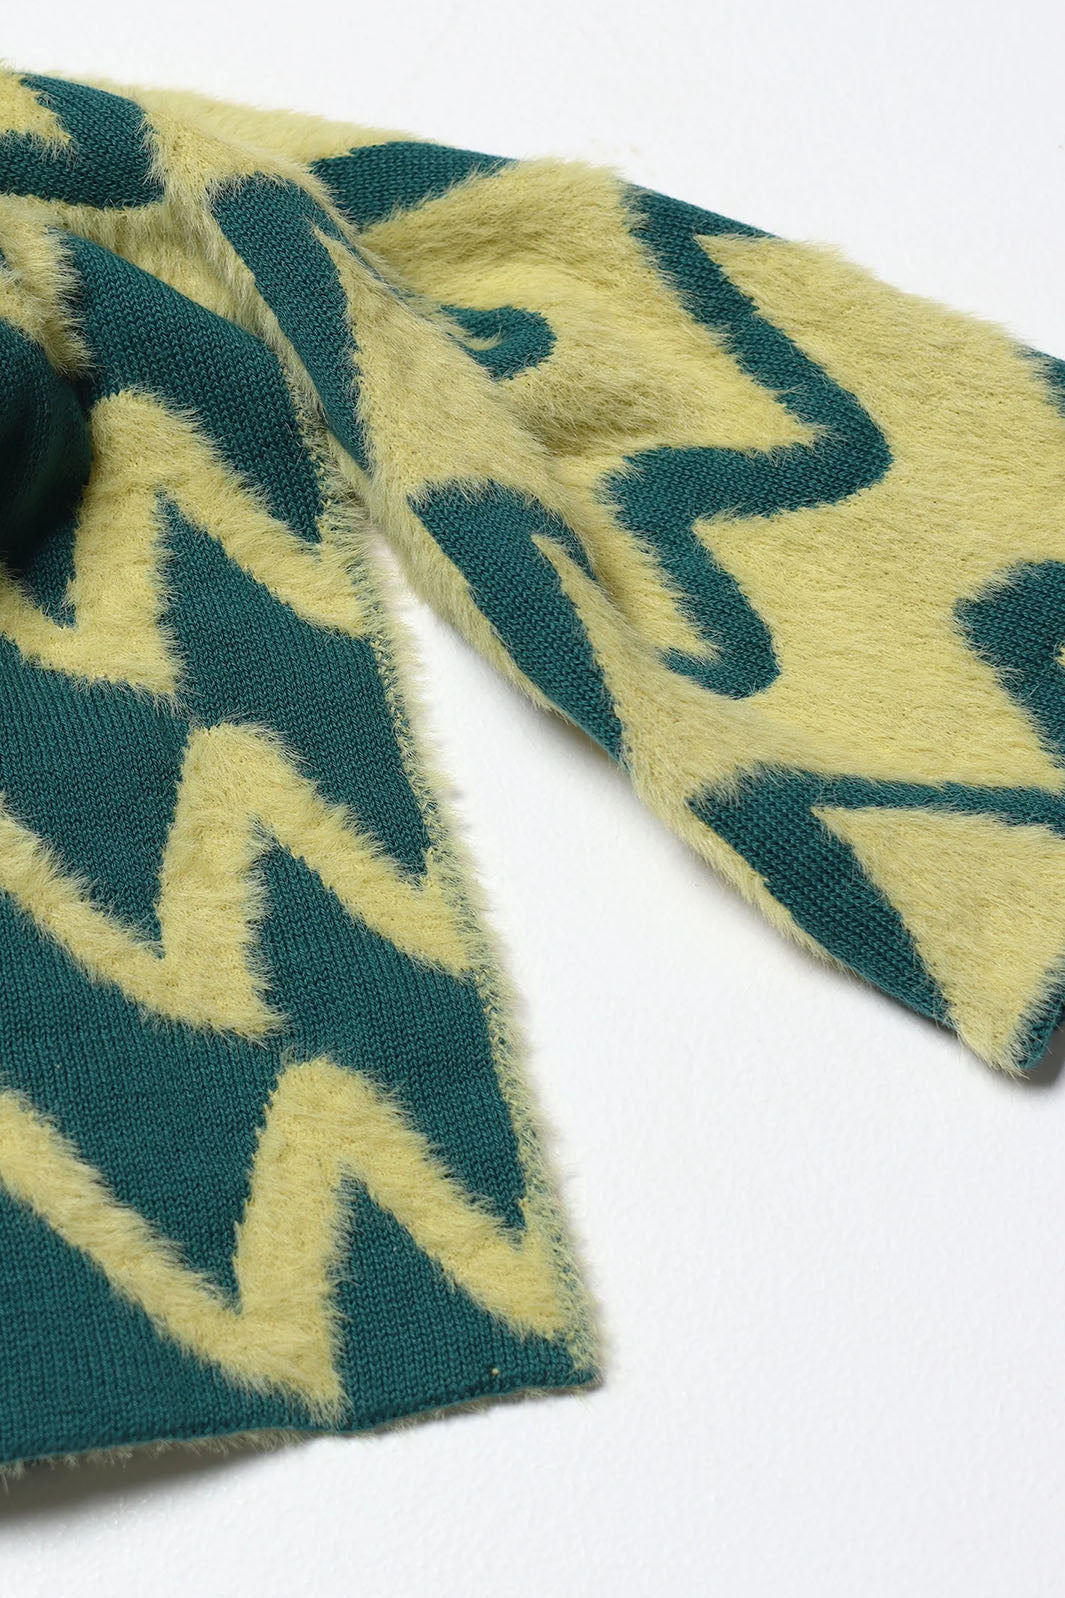 Close up view of yellow and teal fuzzy zig zag fiber scarf.